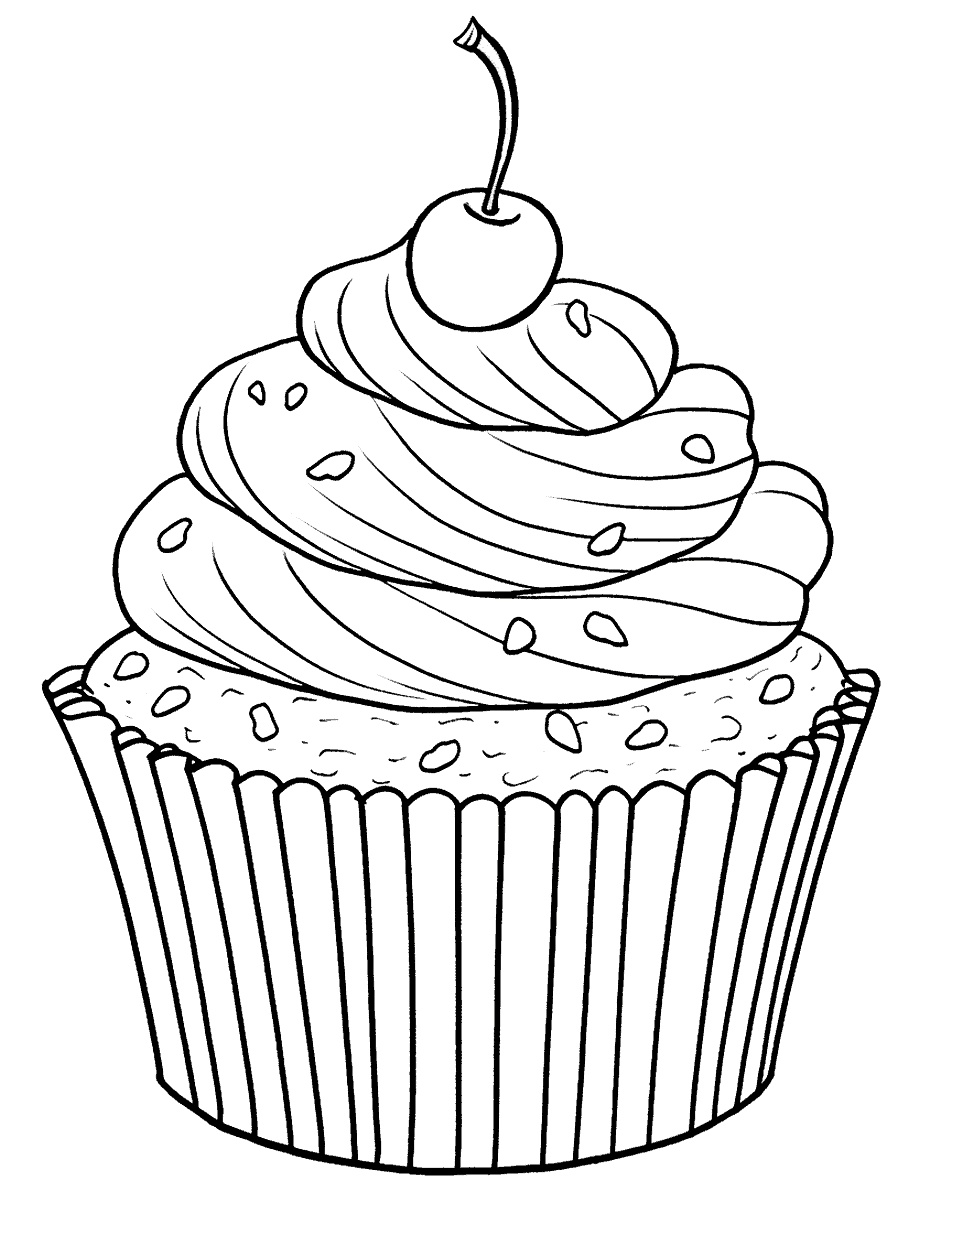 Realistic Cupcake Display Coloring Page - A highly detailed cupcake with lifelike frosting and toppings.